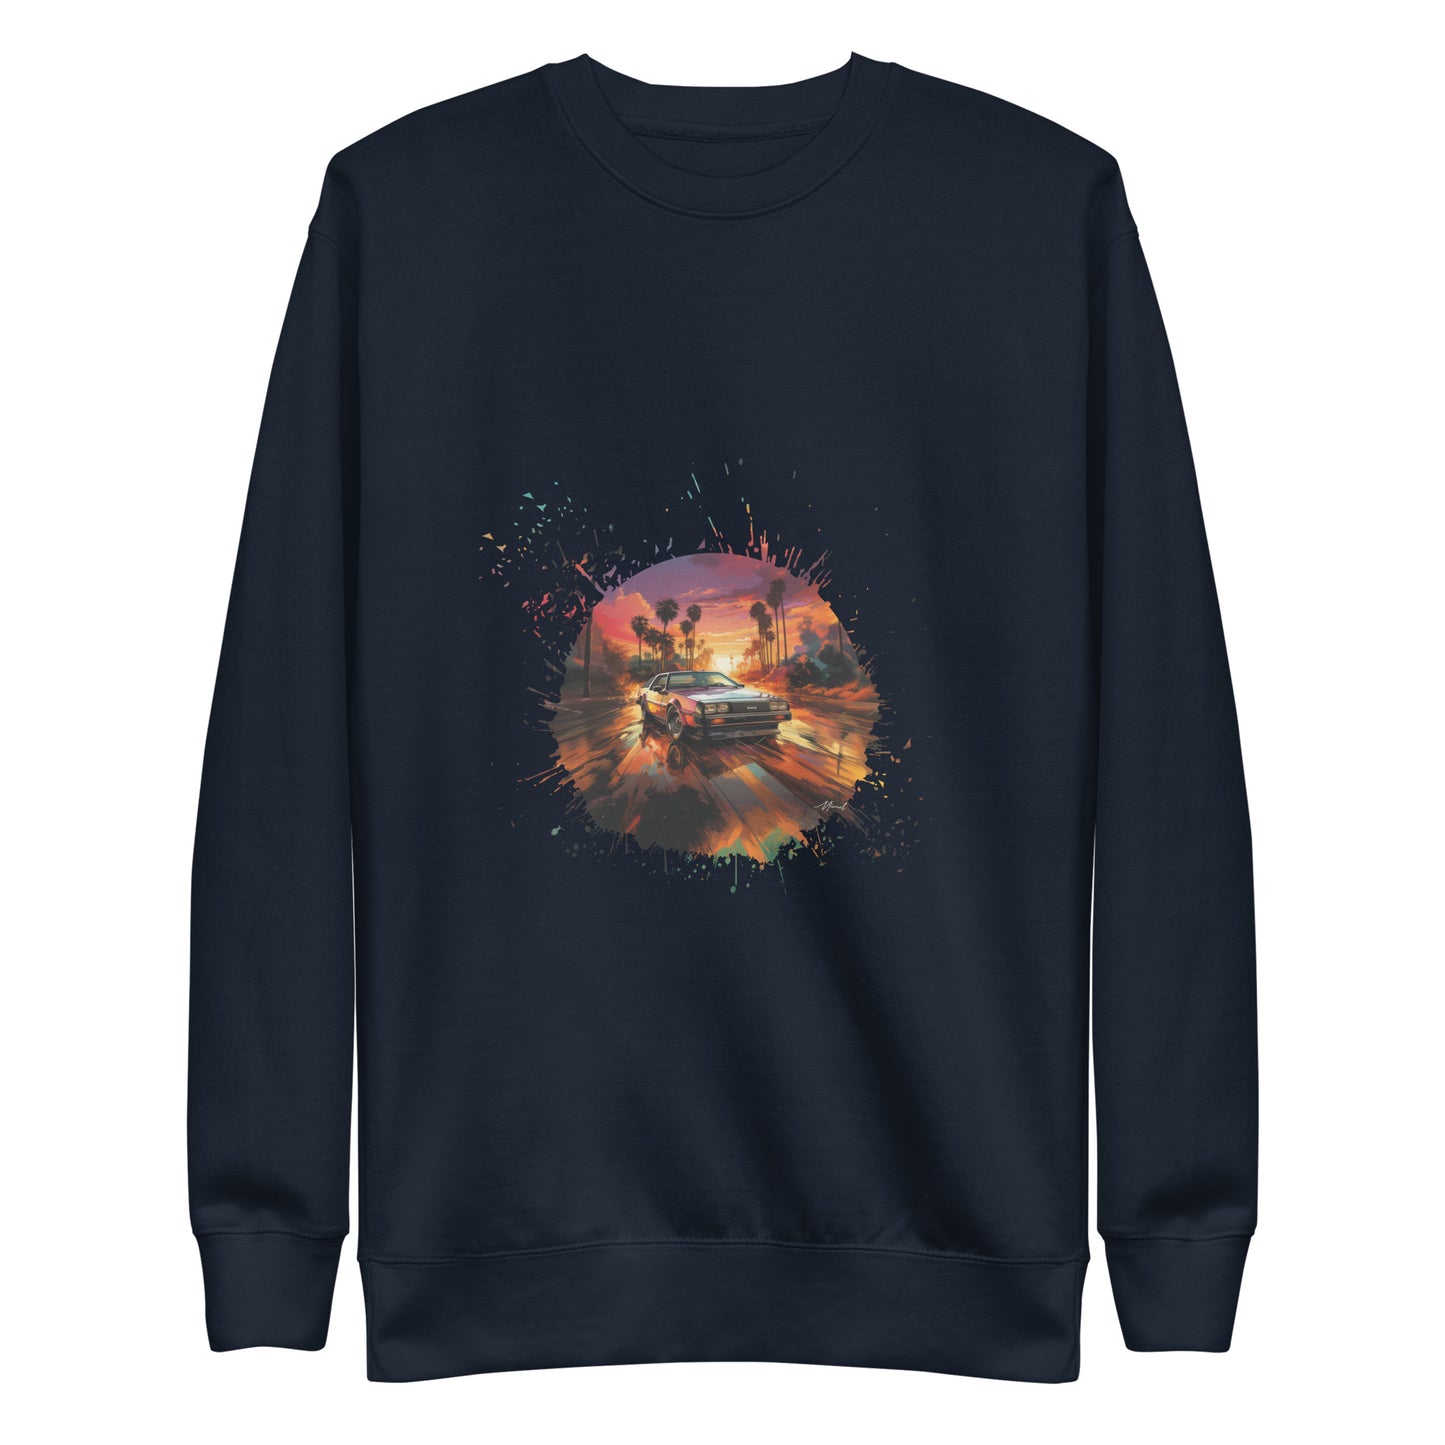 80s Vibes and Time Travel Magic: Delorean Sweater (Unisex)